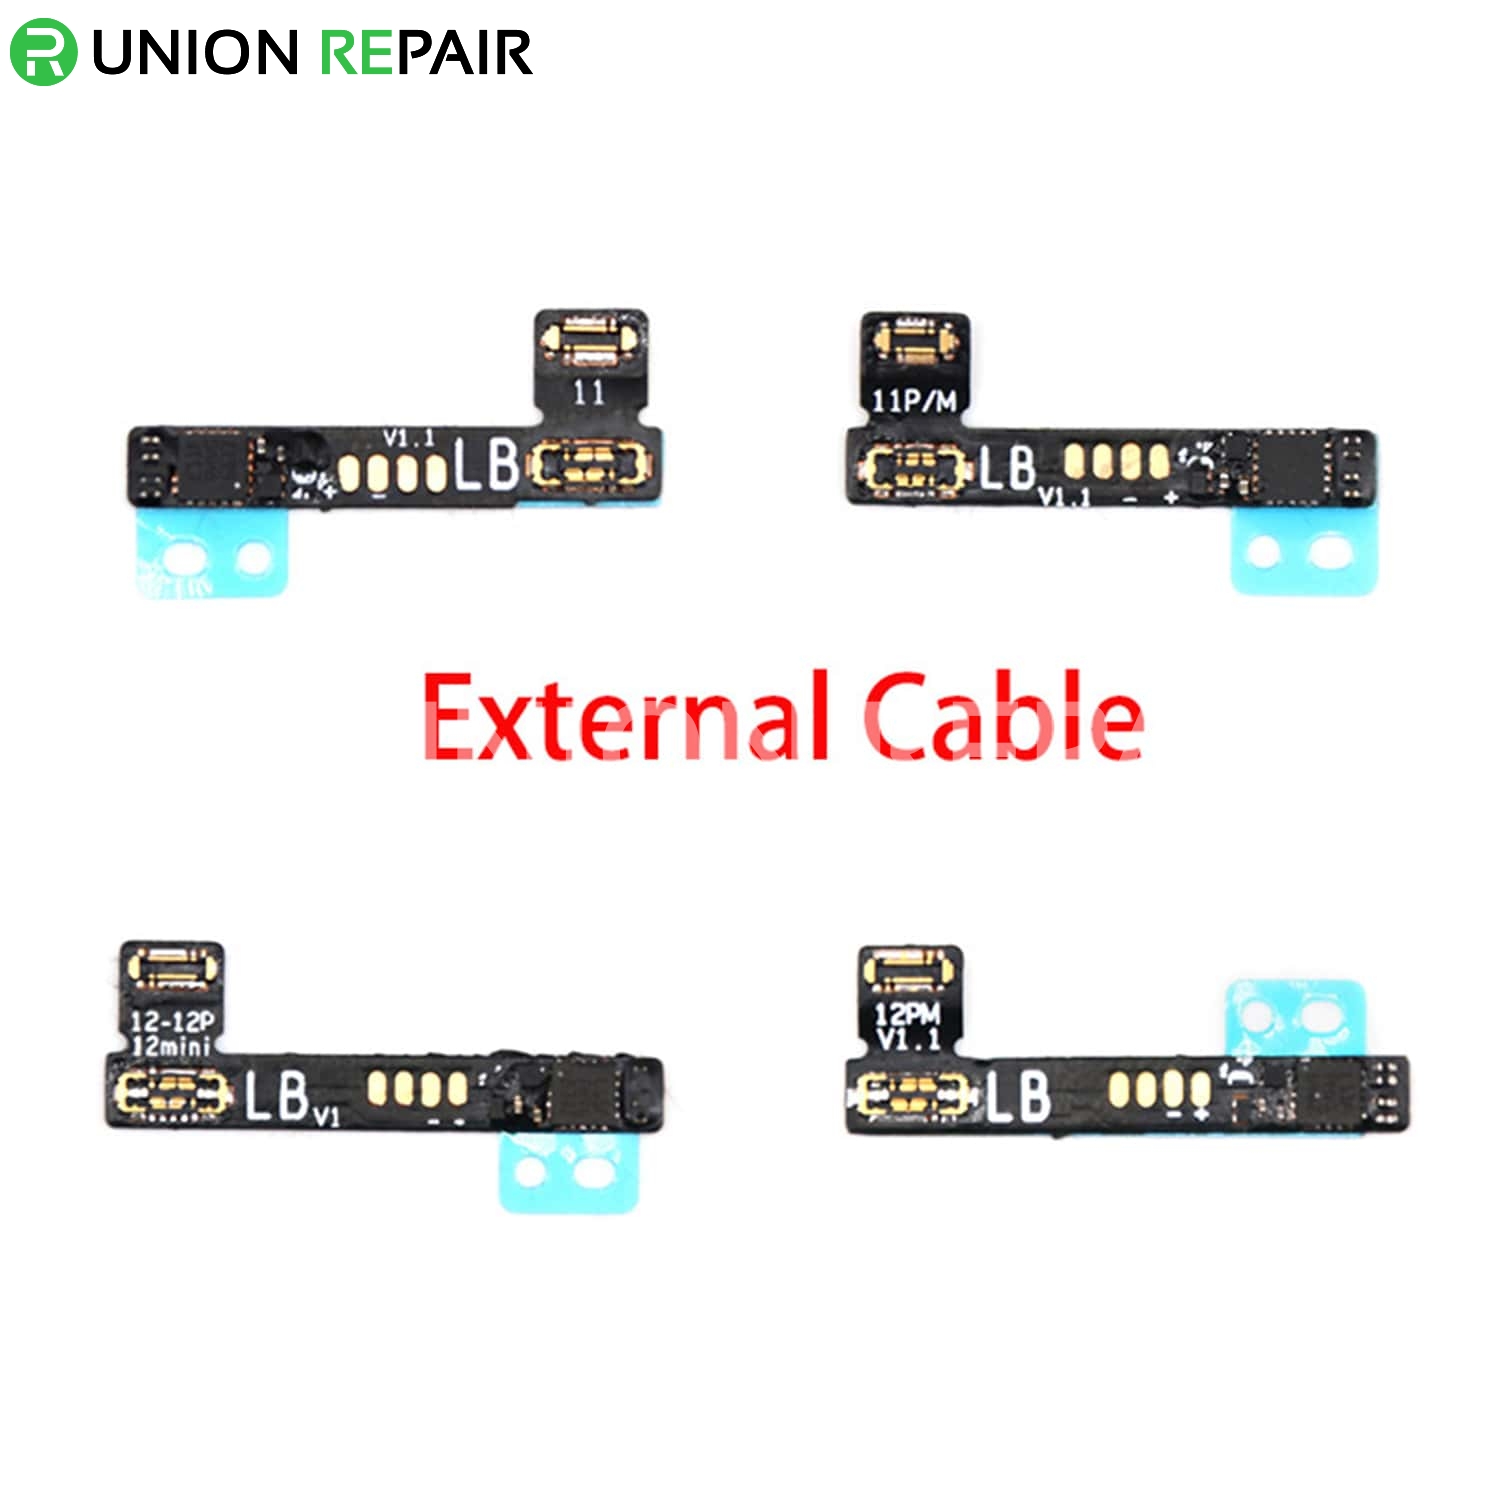 Tag-On Battery Repair Flex Cable for Luban L3 Mini Programmer